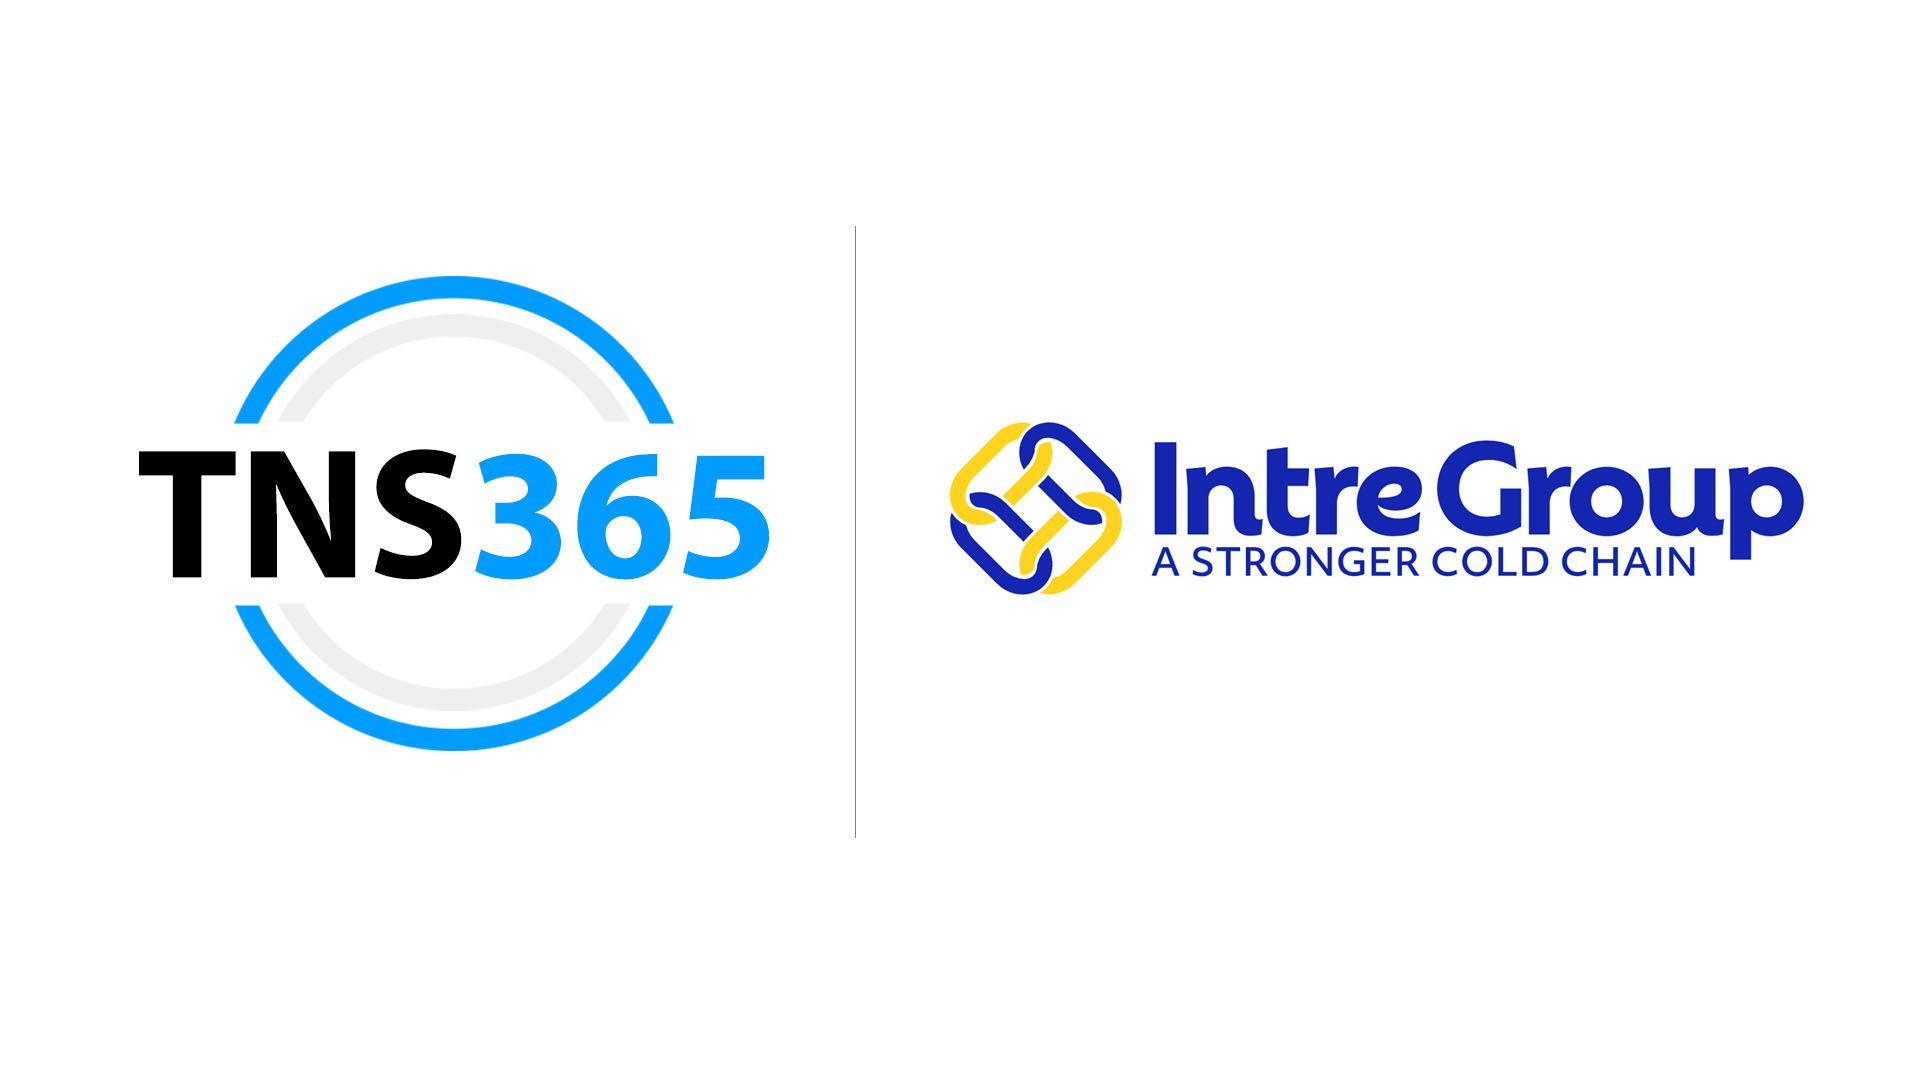 TNS 365 partner with Independent Refrigeration Network Intre Group